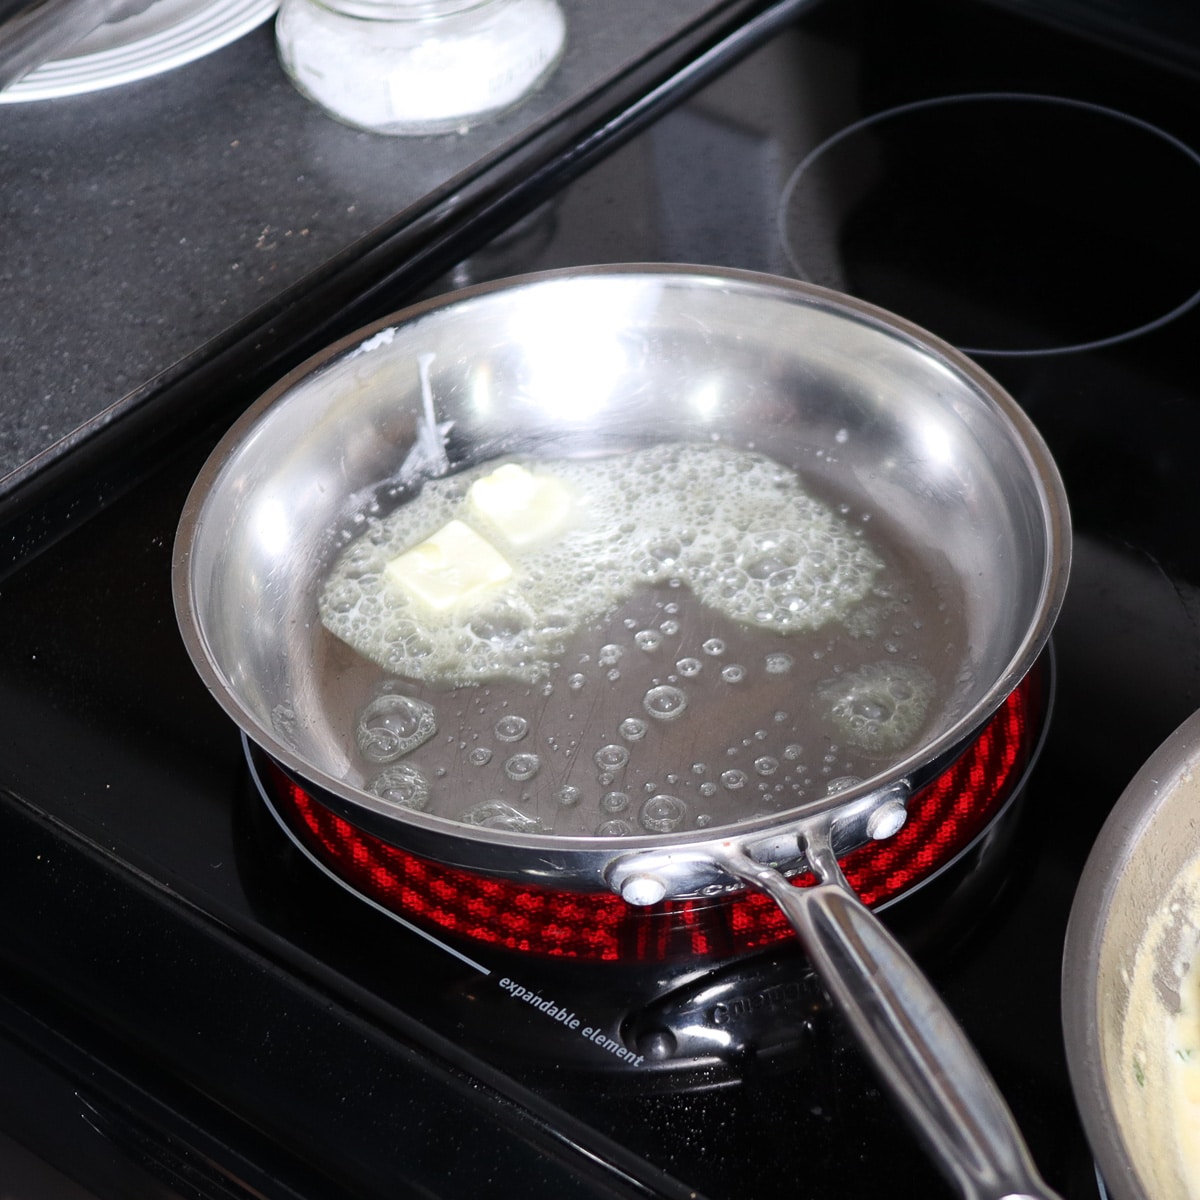 Heating butter in a skillet